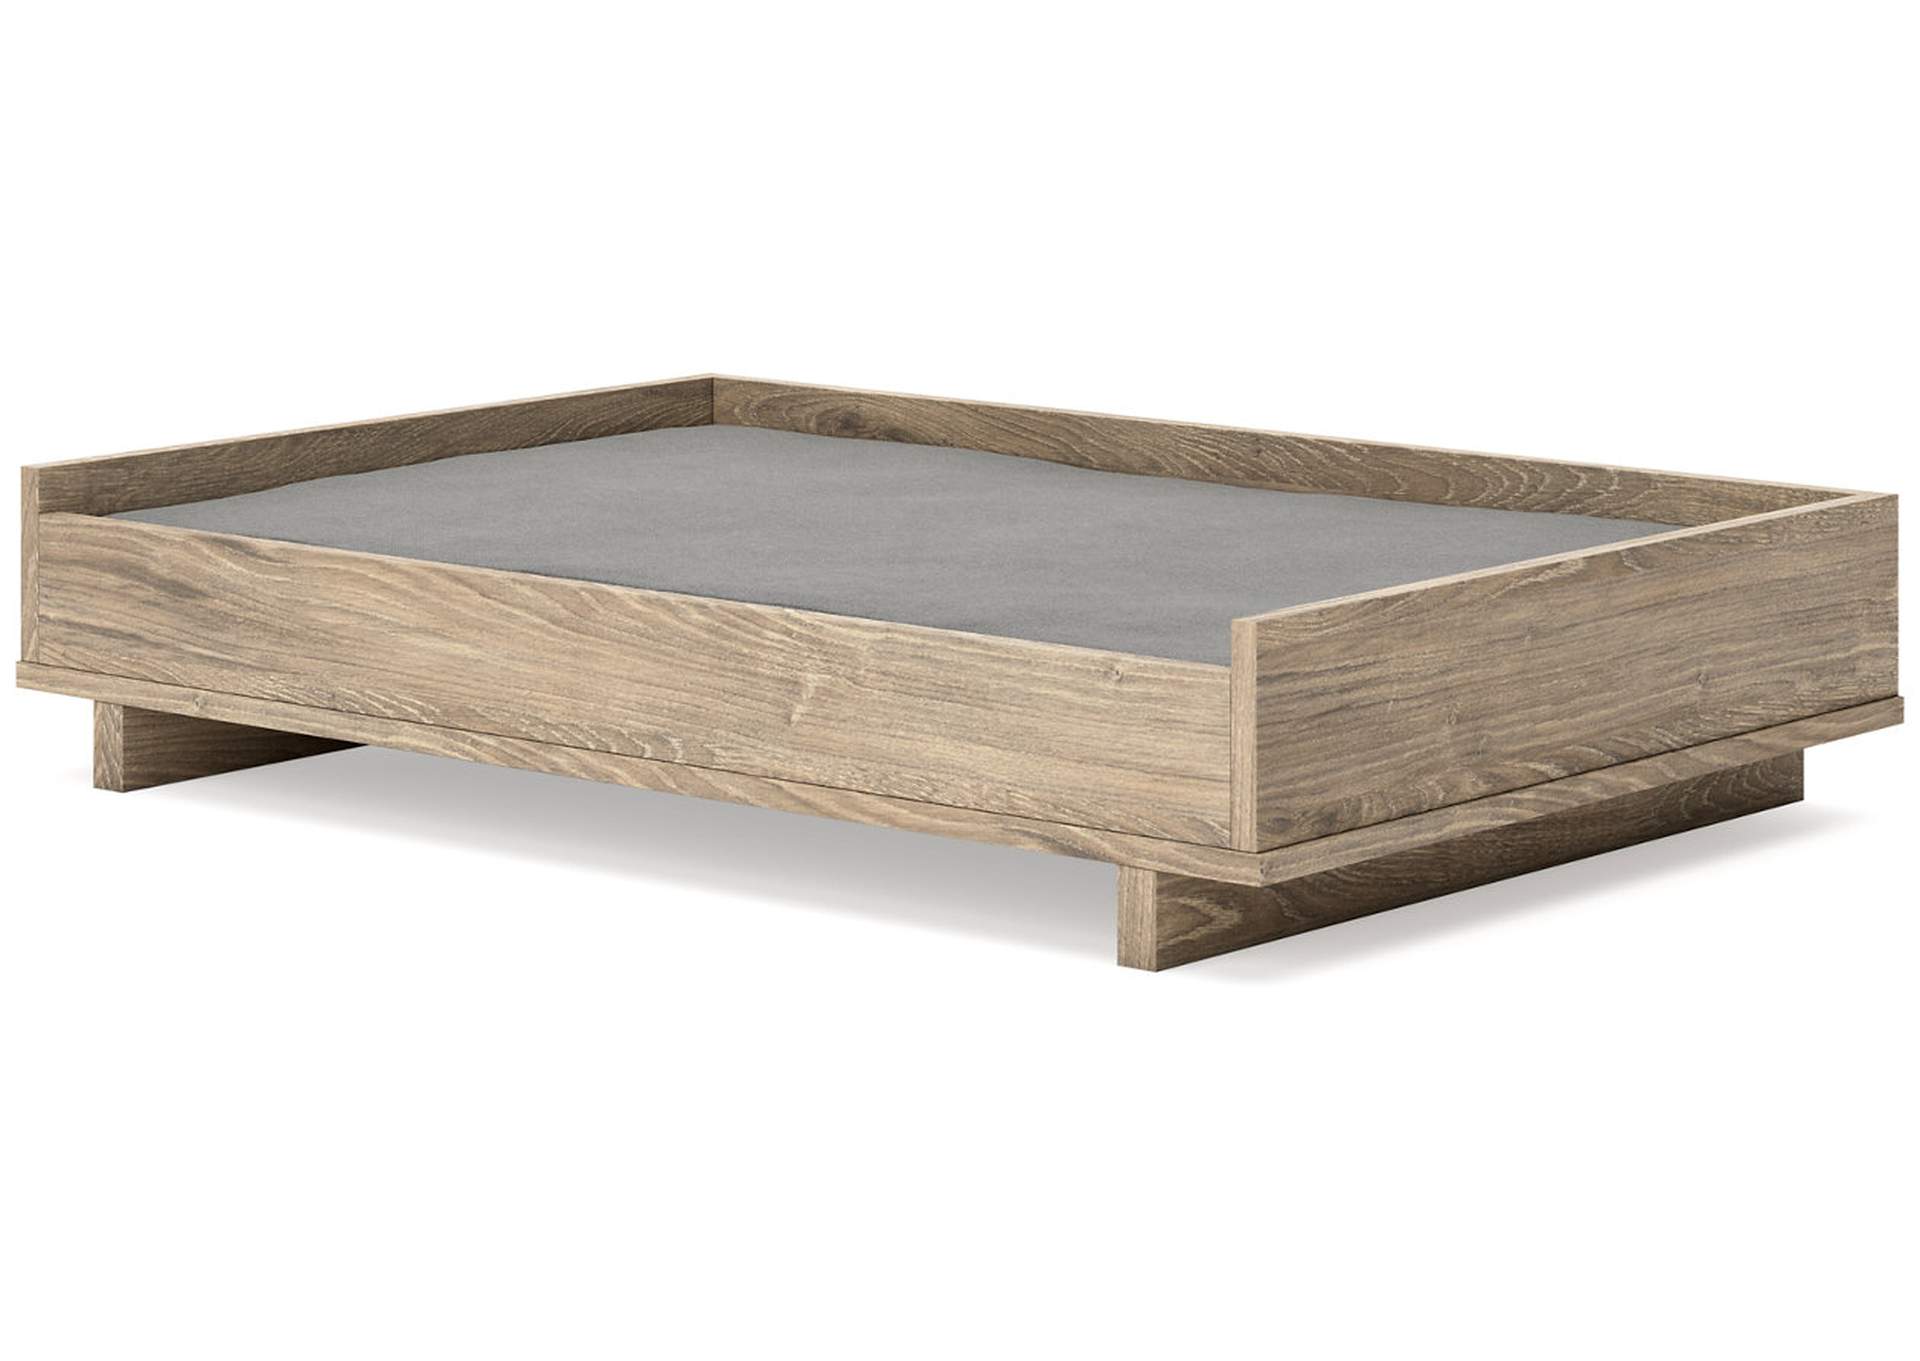 Oliah Pet Bed Frame,Signature Design By Ashley